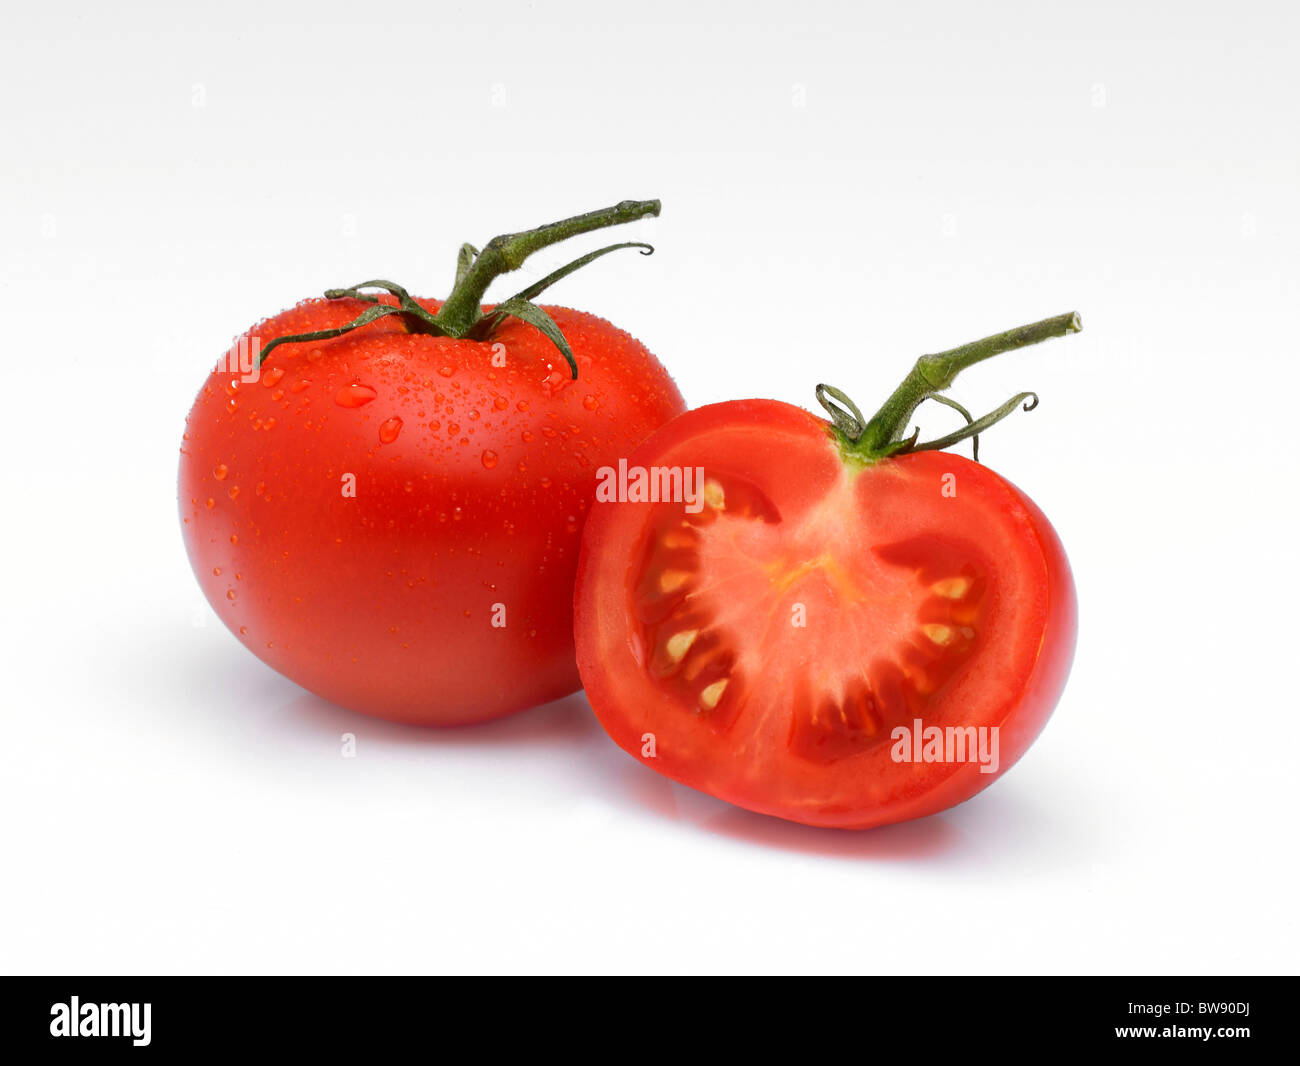 An arrangement of a whole Tomato and a half on a white background with water droplets and stalks. Stock Photo